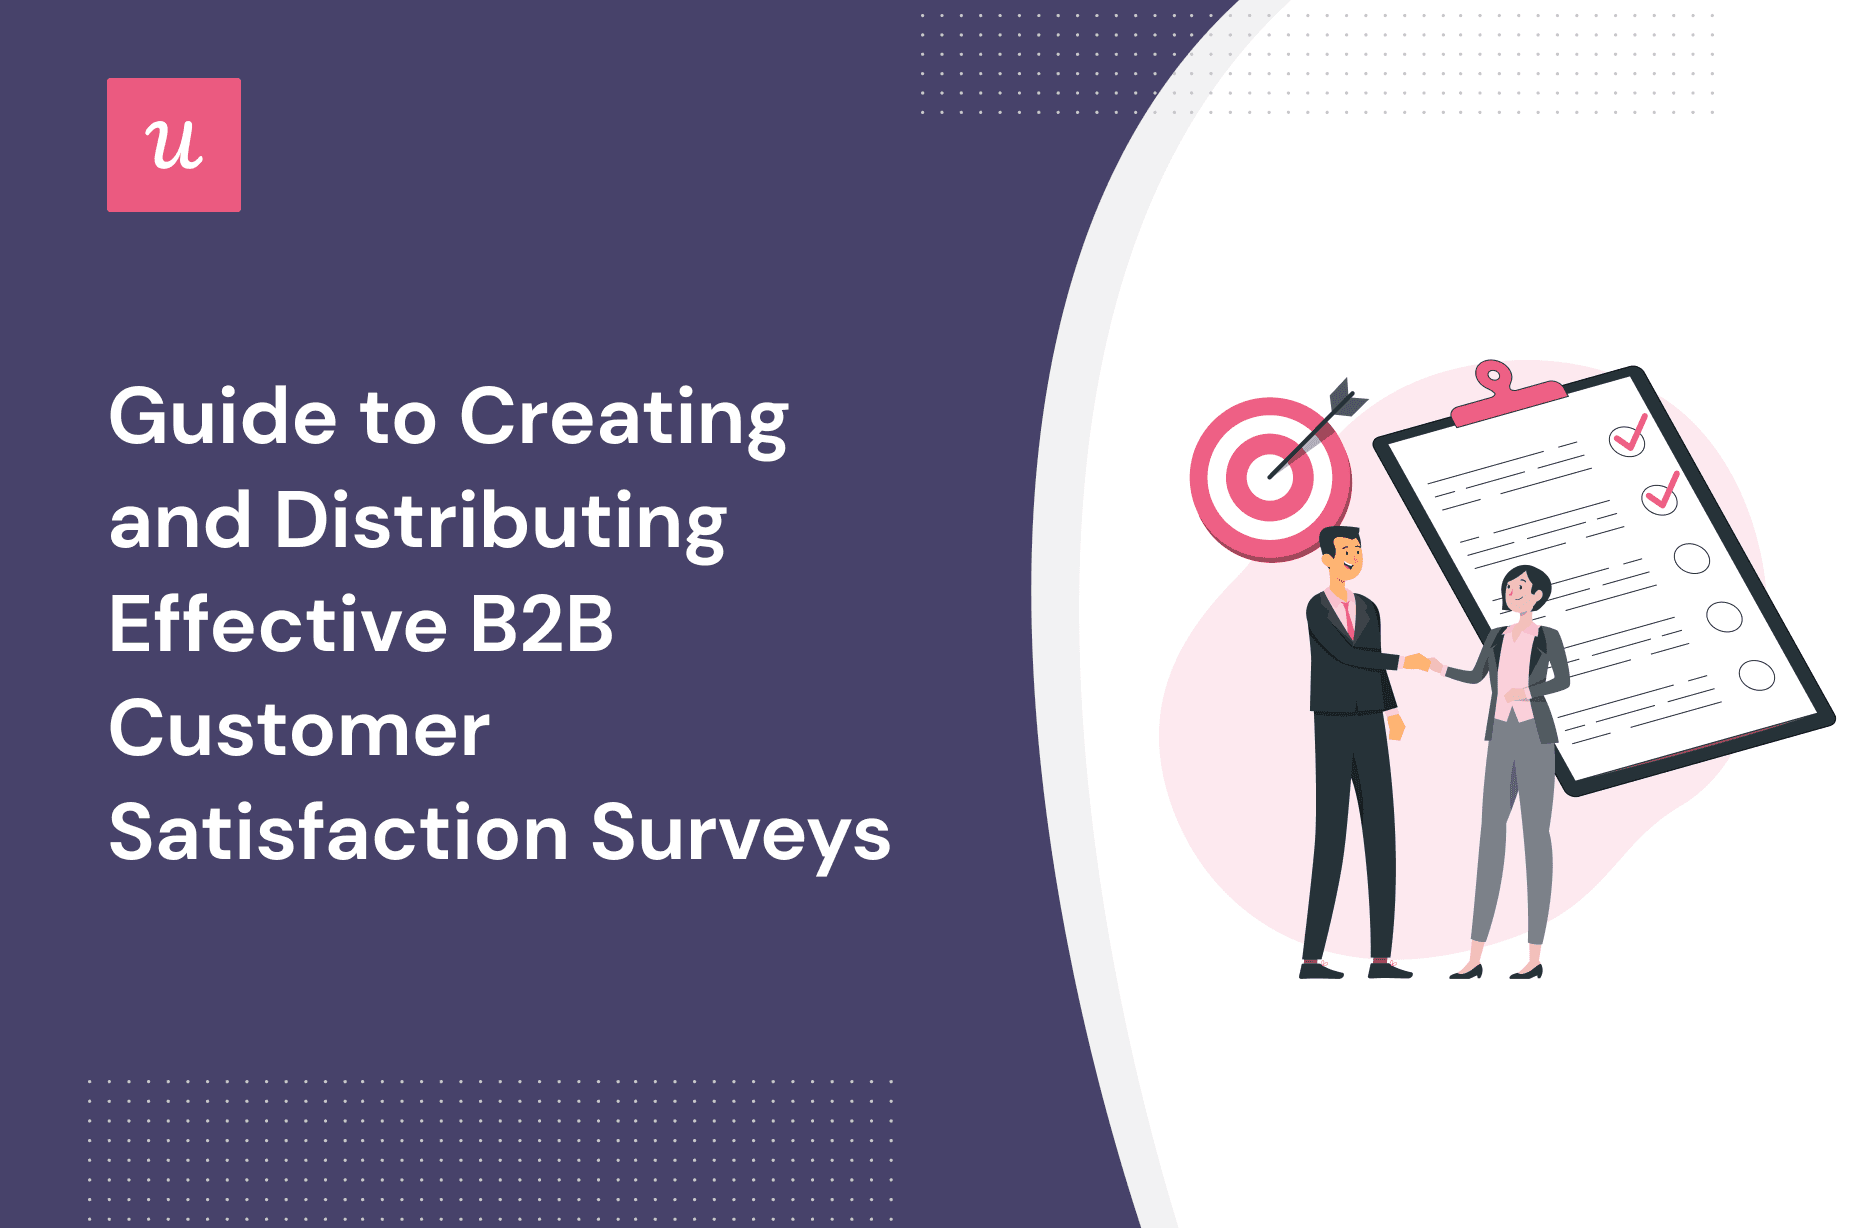 Guide to Creating and Distributing Effective B2B Customer Satisfaction Surveys cover